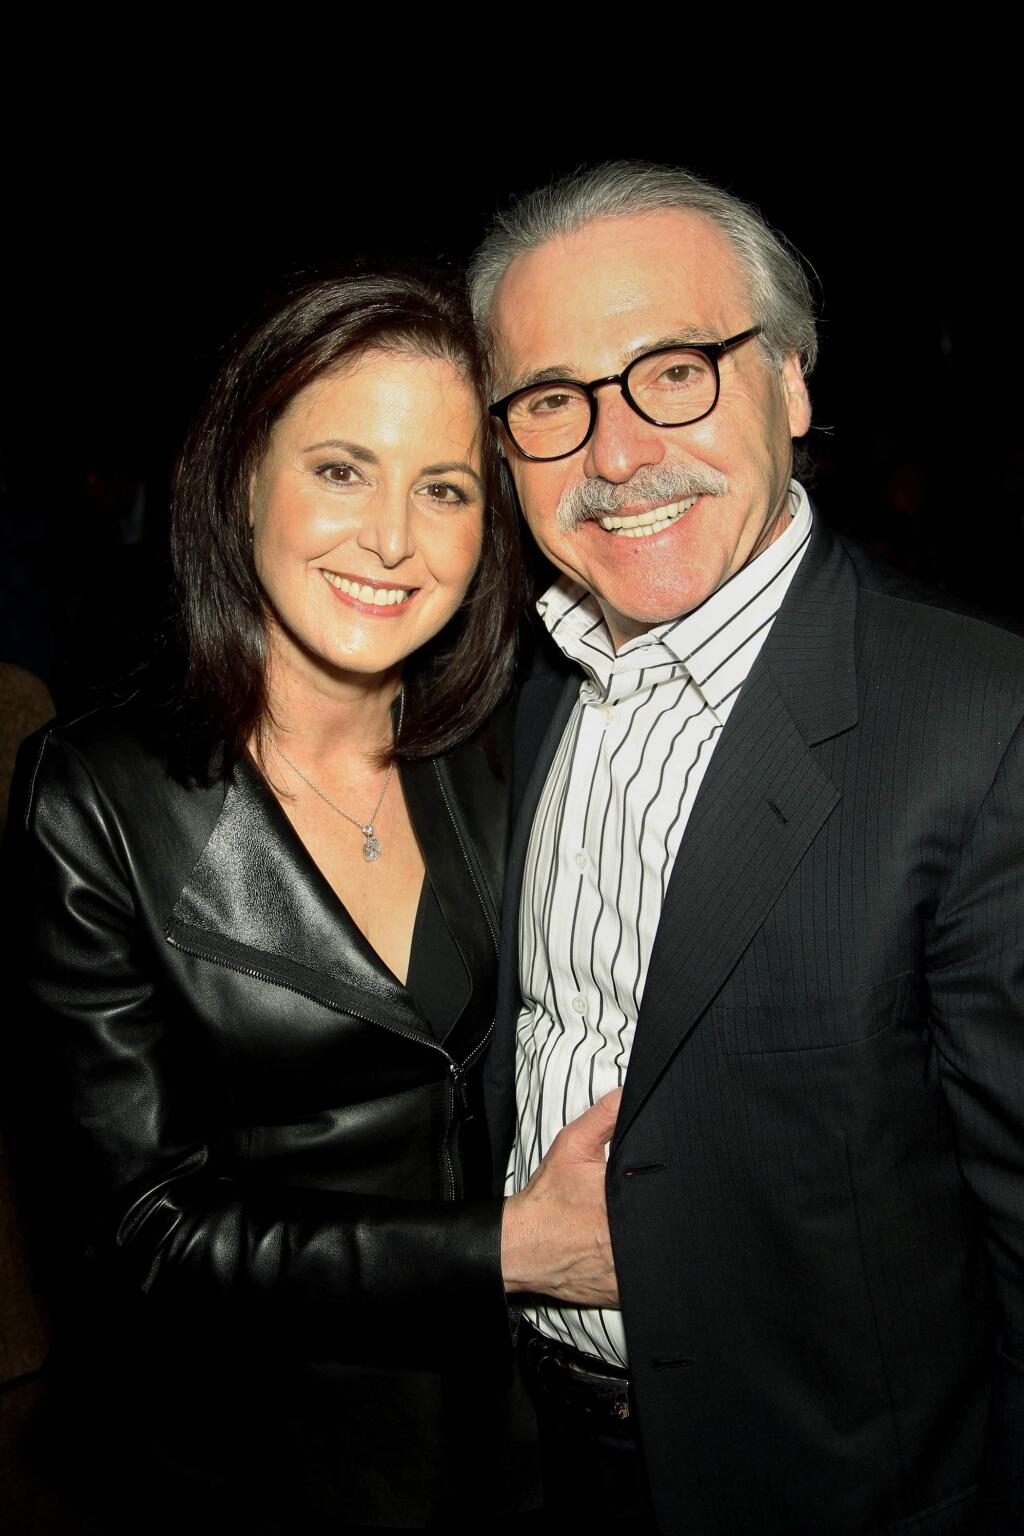 In this Jan. 31, 2014 photo, David Pecker, Chairman and CEO of American Media, poses with his wife, Karen Pecker, at the Shape & Men's Fitness Super Bowl Party in New York. The Aug. 21, 2018 plea deal reached by Donald Trump's former attorney Michael Cohen has laid bare a relationship between the president and Pecker, whose company publishes the National Enquirer. Besides detailing tabloid's involvement in payoffs to porn star Stormy Daniels and Playboy Playmate Karen McDougal to keep quiet about alleged affairs with Trump, court papers showed how David Pecker, a longtime friend of the president, offered to help Trump stave off negative stories during the 2016 campaign. (Marion Curtis via AP)